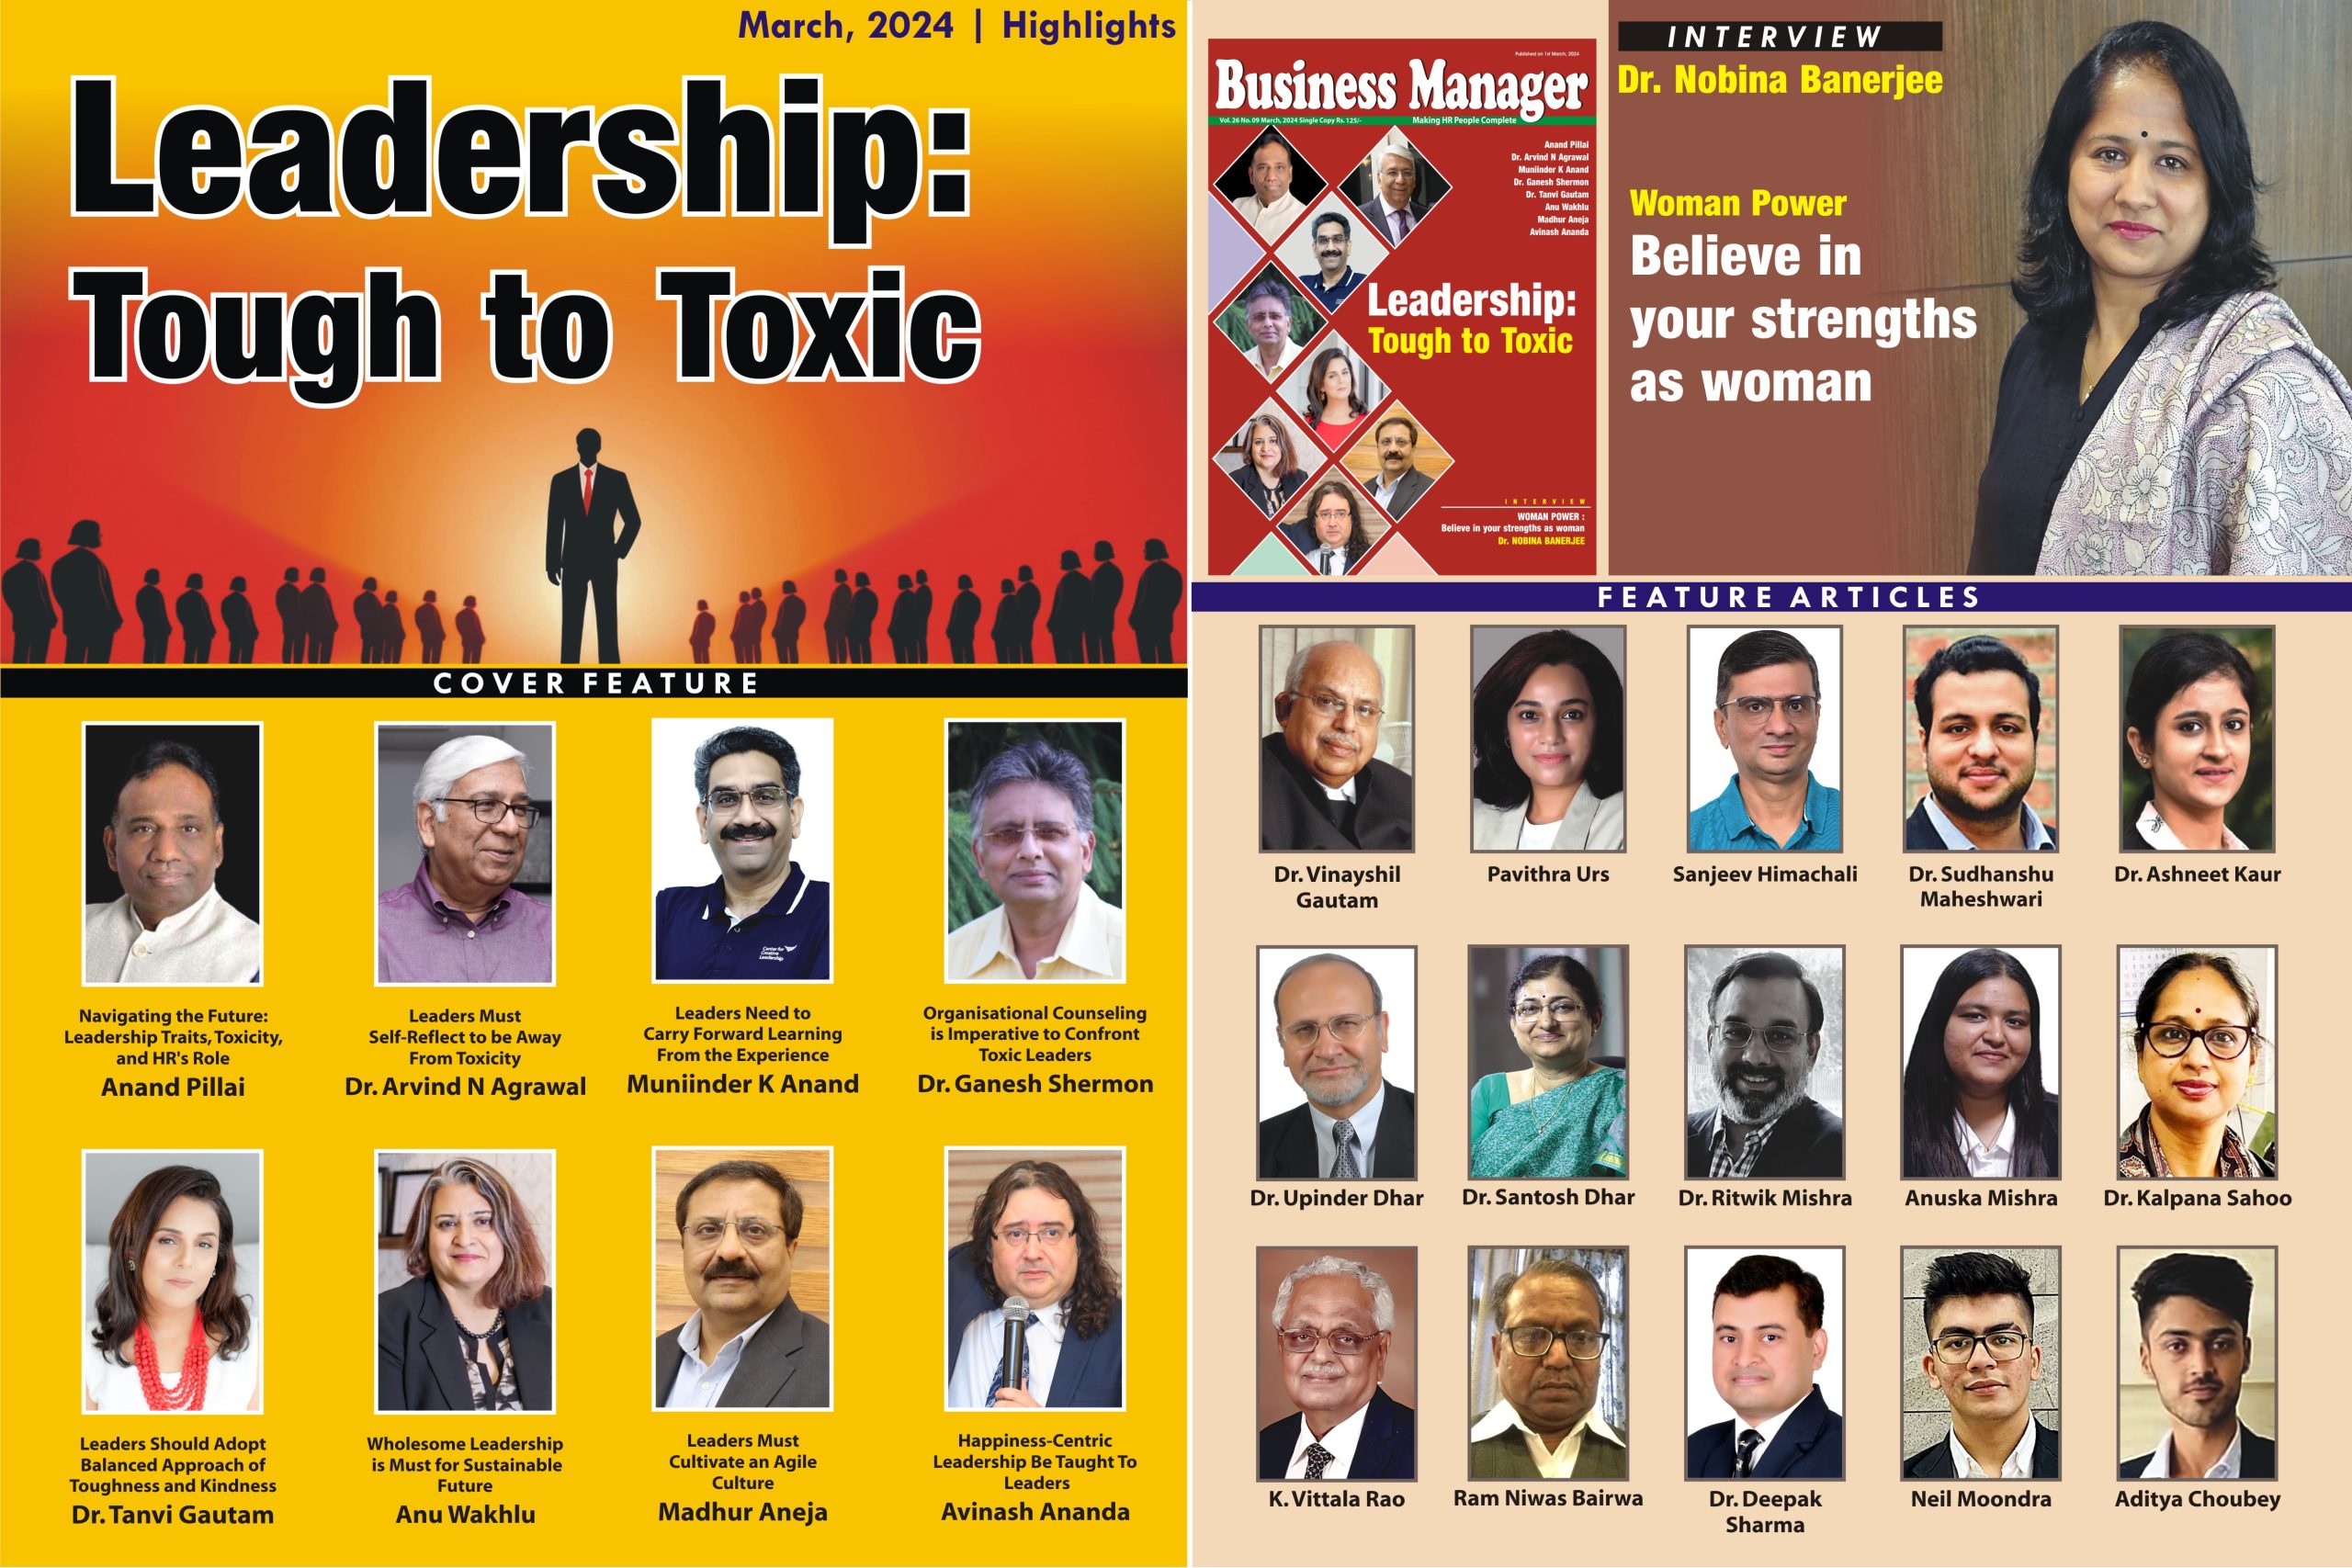 Leadership: Tough to Toxic, March 2024